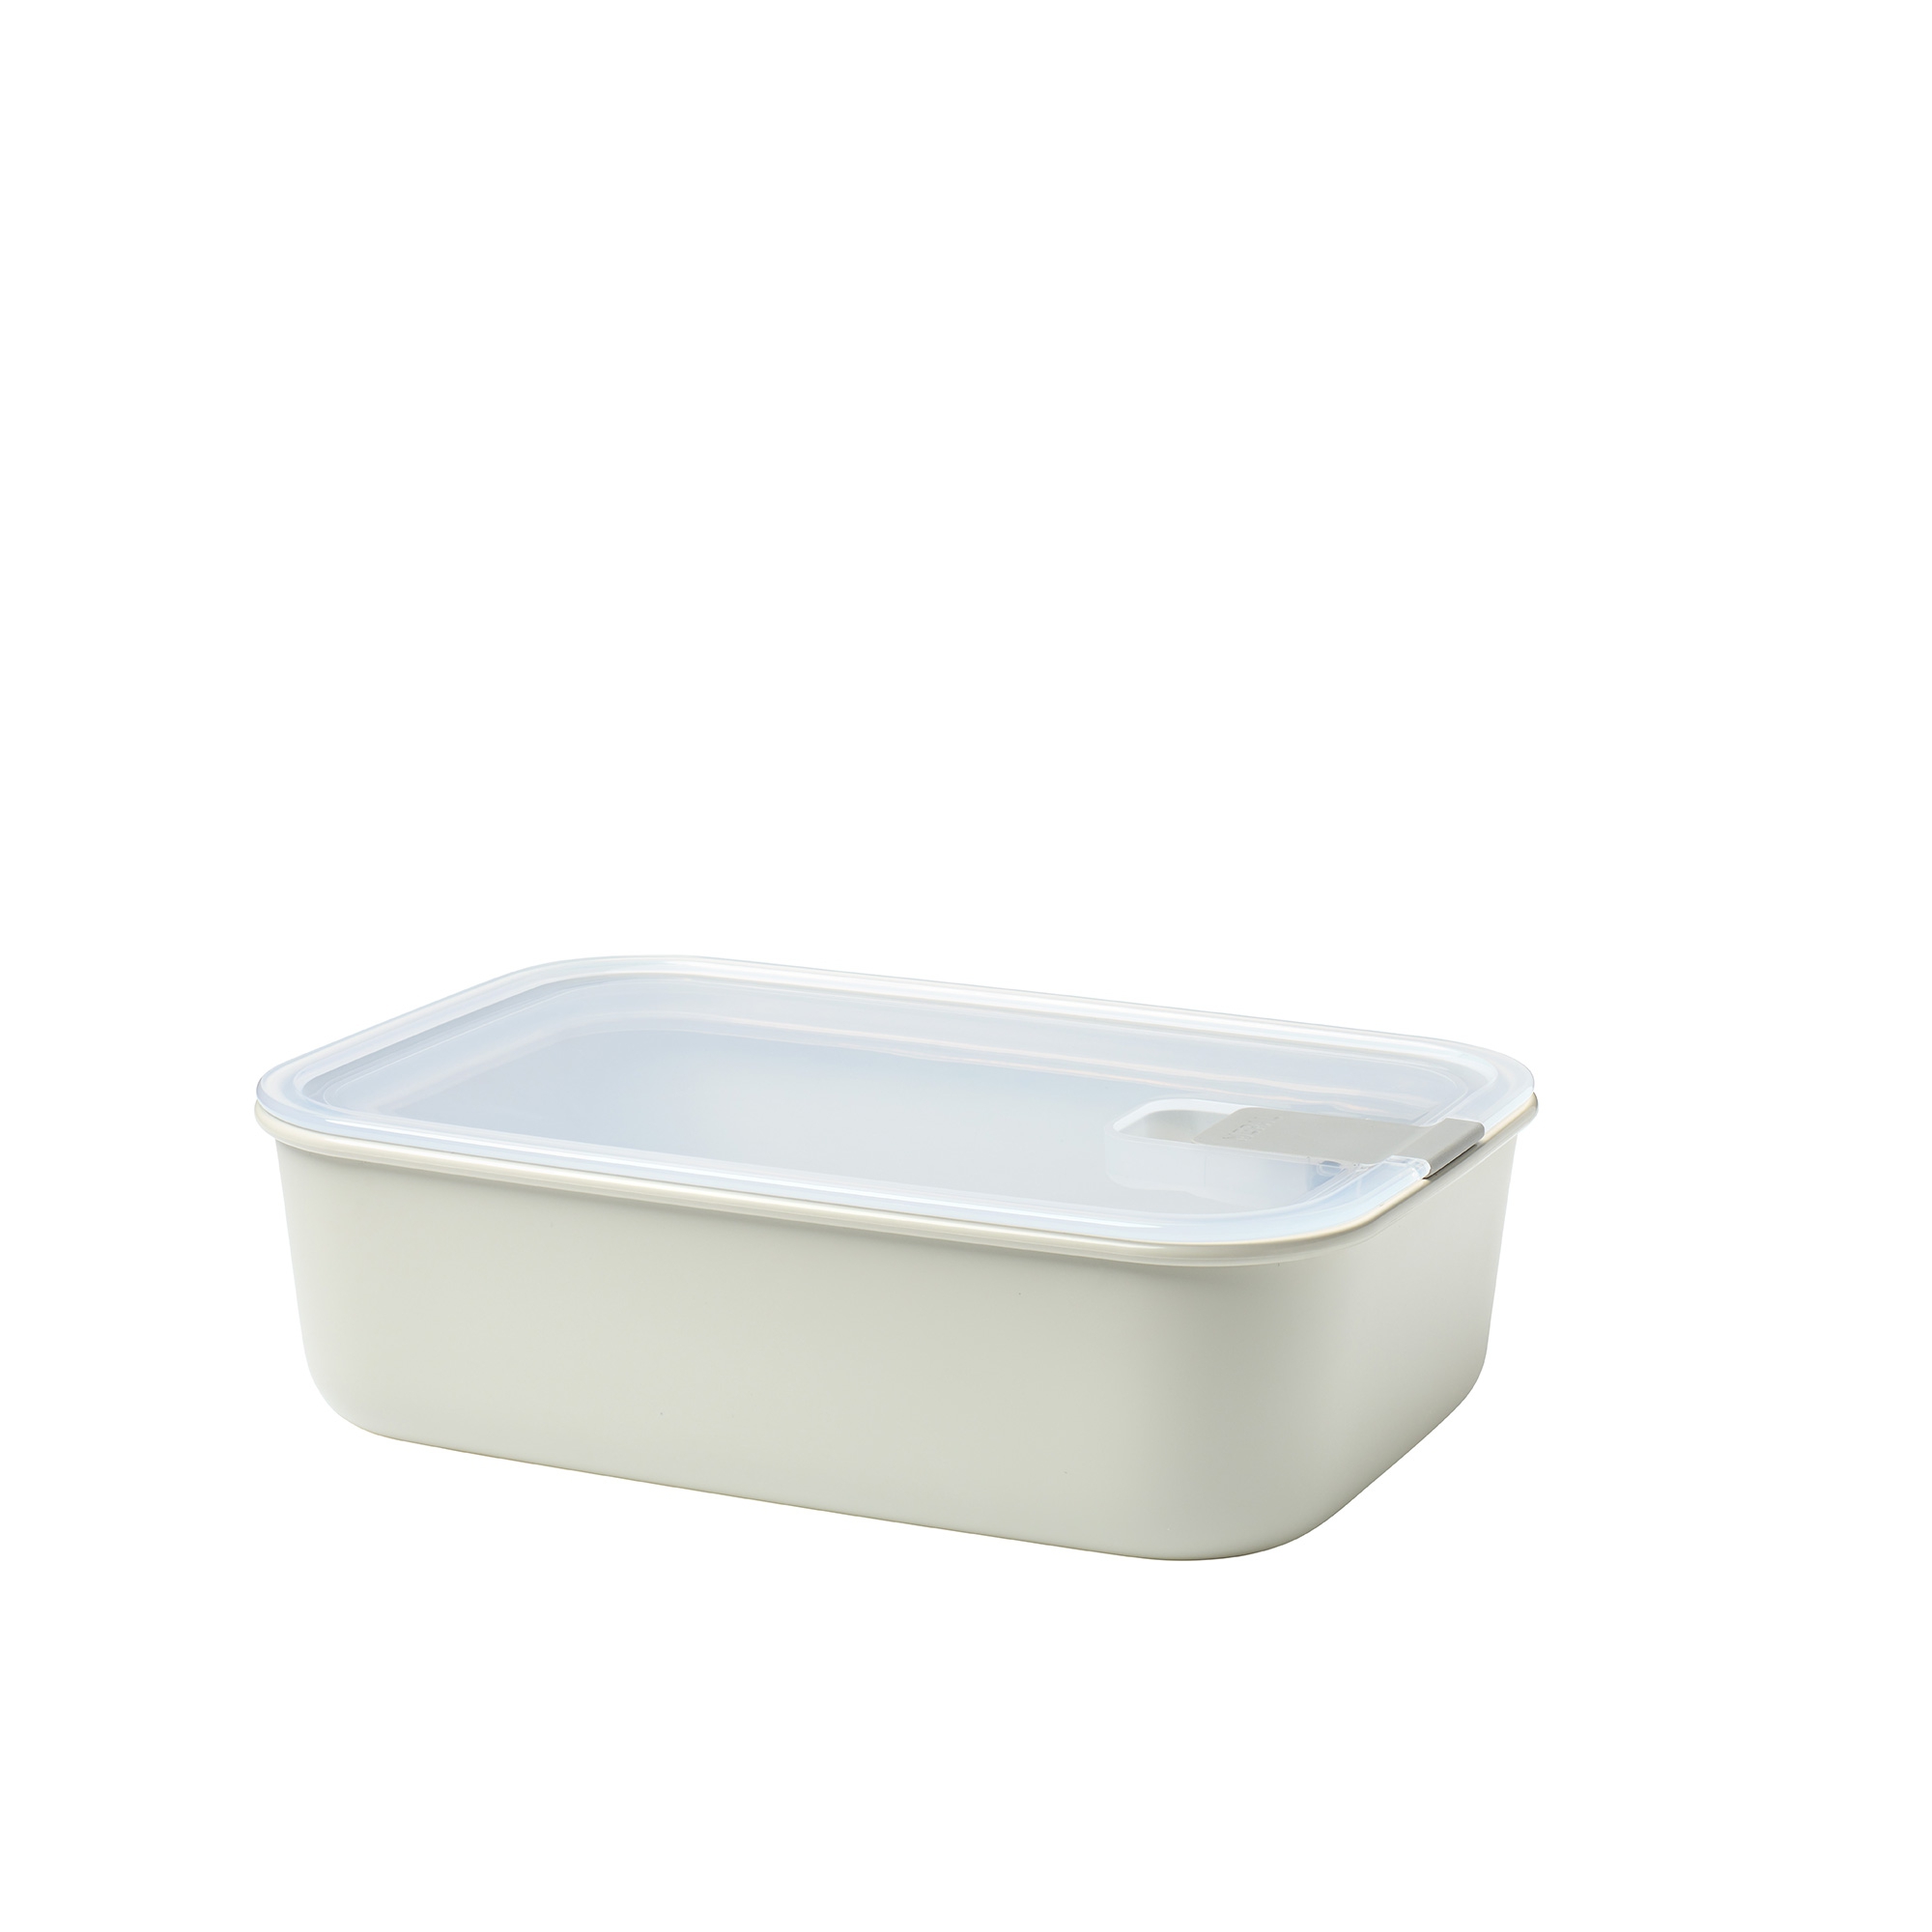 Mepal - Easyclip food storage box - different sizes and colors